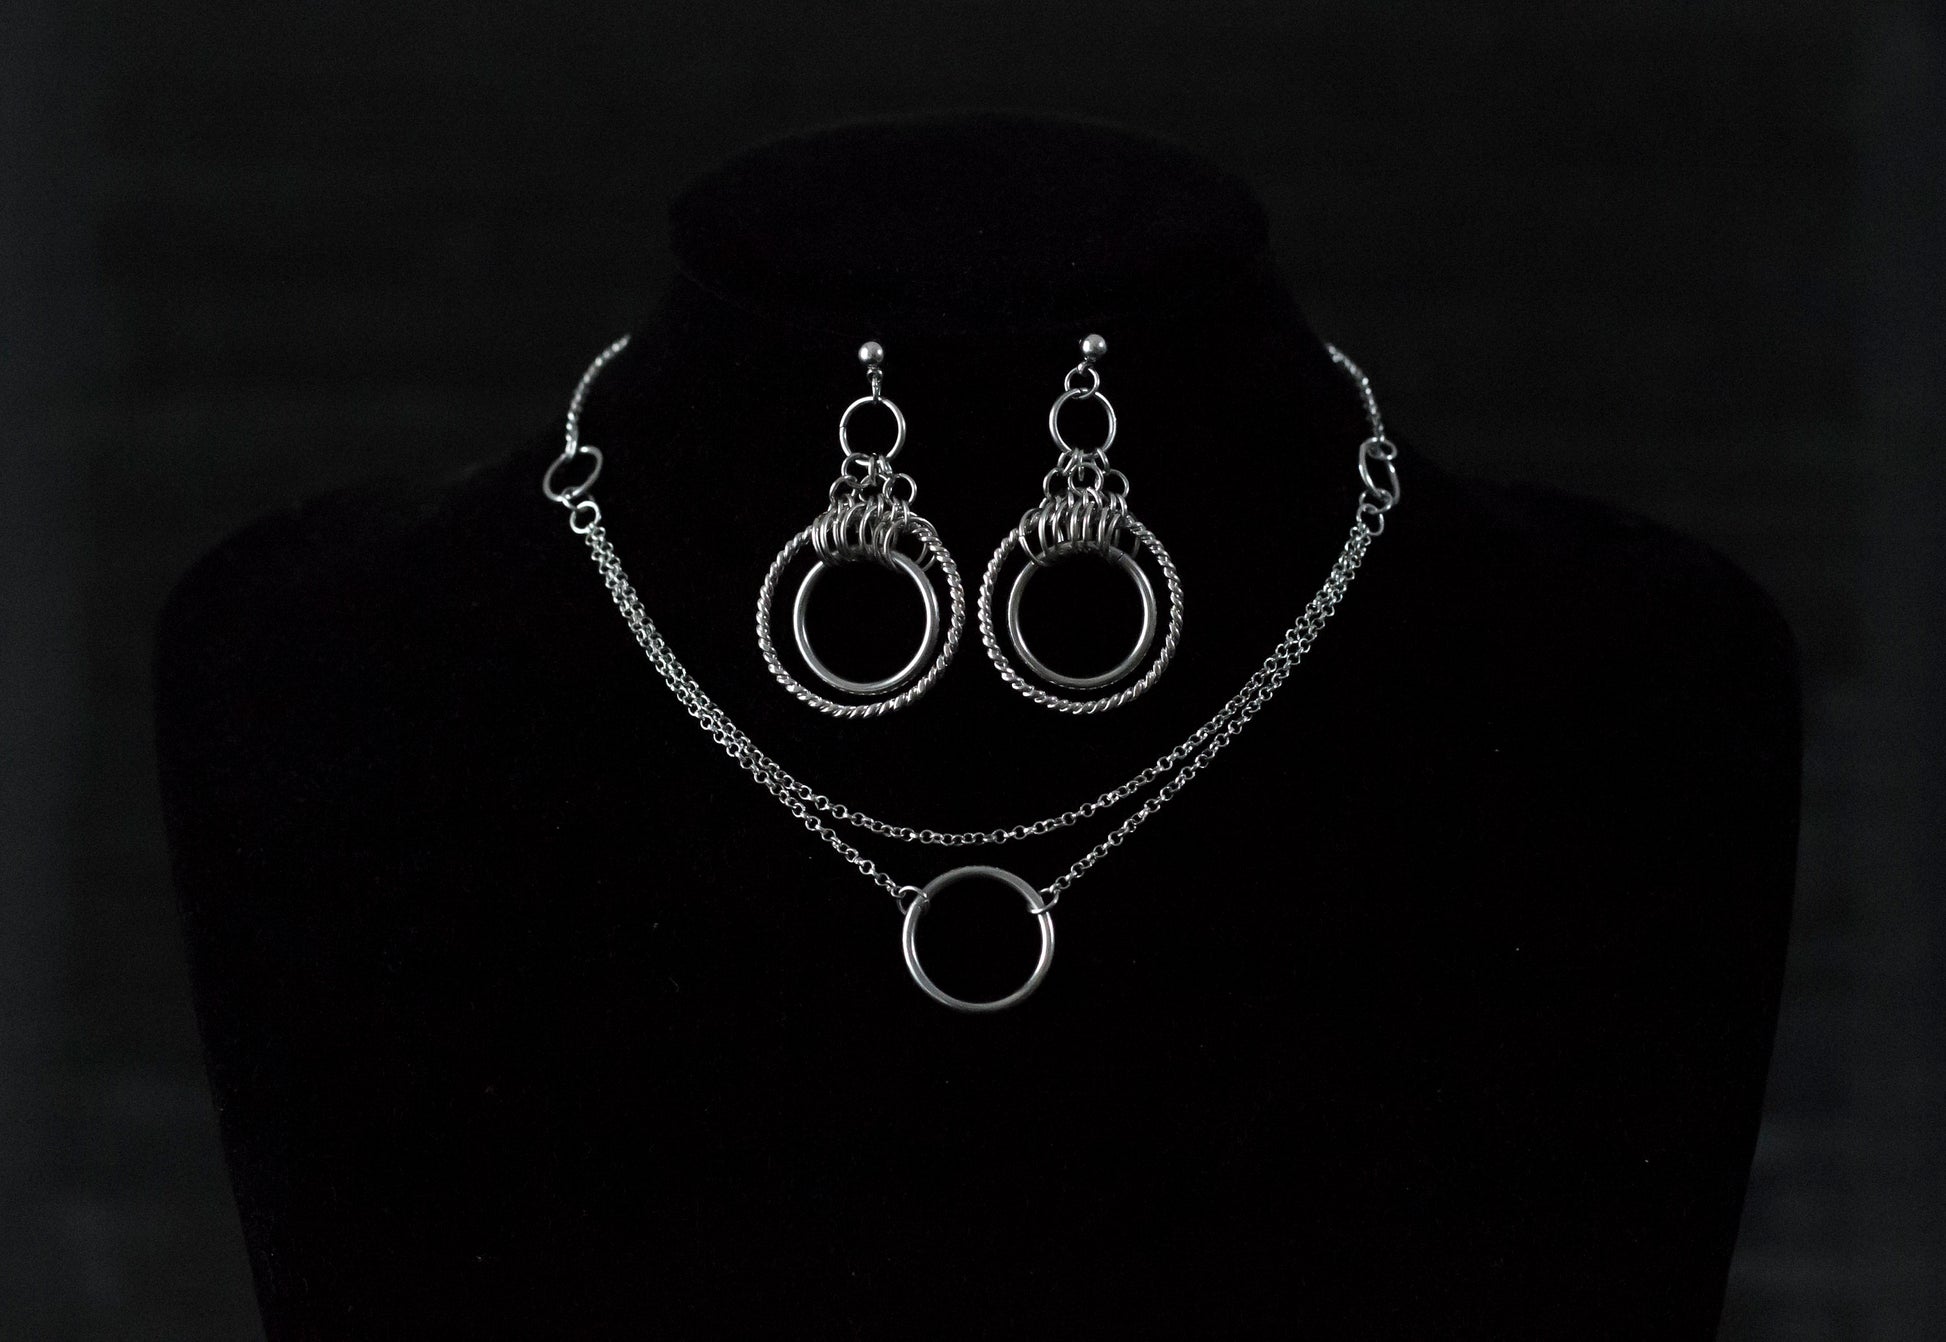 This image showcases a set of double hoop earrings and a matching O-ring chain necklace. The jewelry is displayed against a matte black mannequin bust, highlighting the silver sheen of the metalwork. The earrings feature two concentric hoops with decorative elements on the outer ring, while the necklace has a simple, elegant O-ring centerpiece connected by multiple chains of varying lengths.